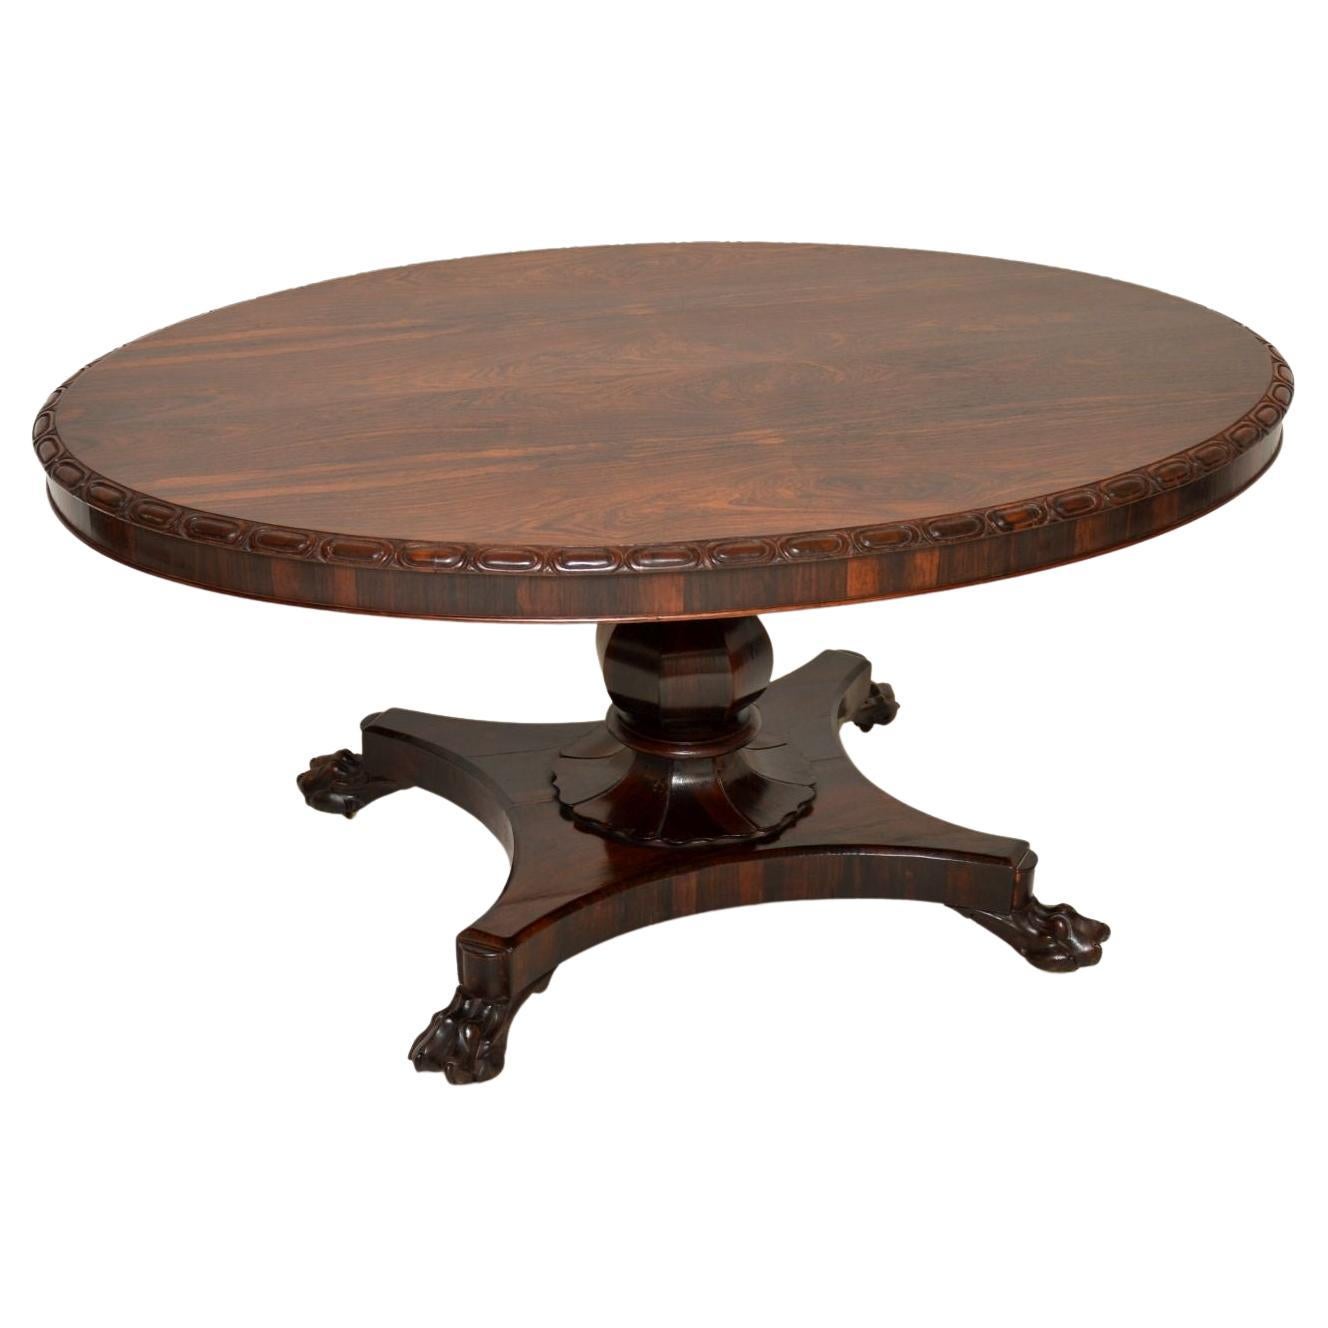 A fine example of a William IV period table. This was made in England, it dates from the 1830-40’s.

It is of superb quality, with lovely carving on the edge of the oval top and a beautifully carved platform base. The design of this table,